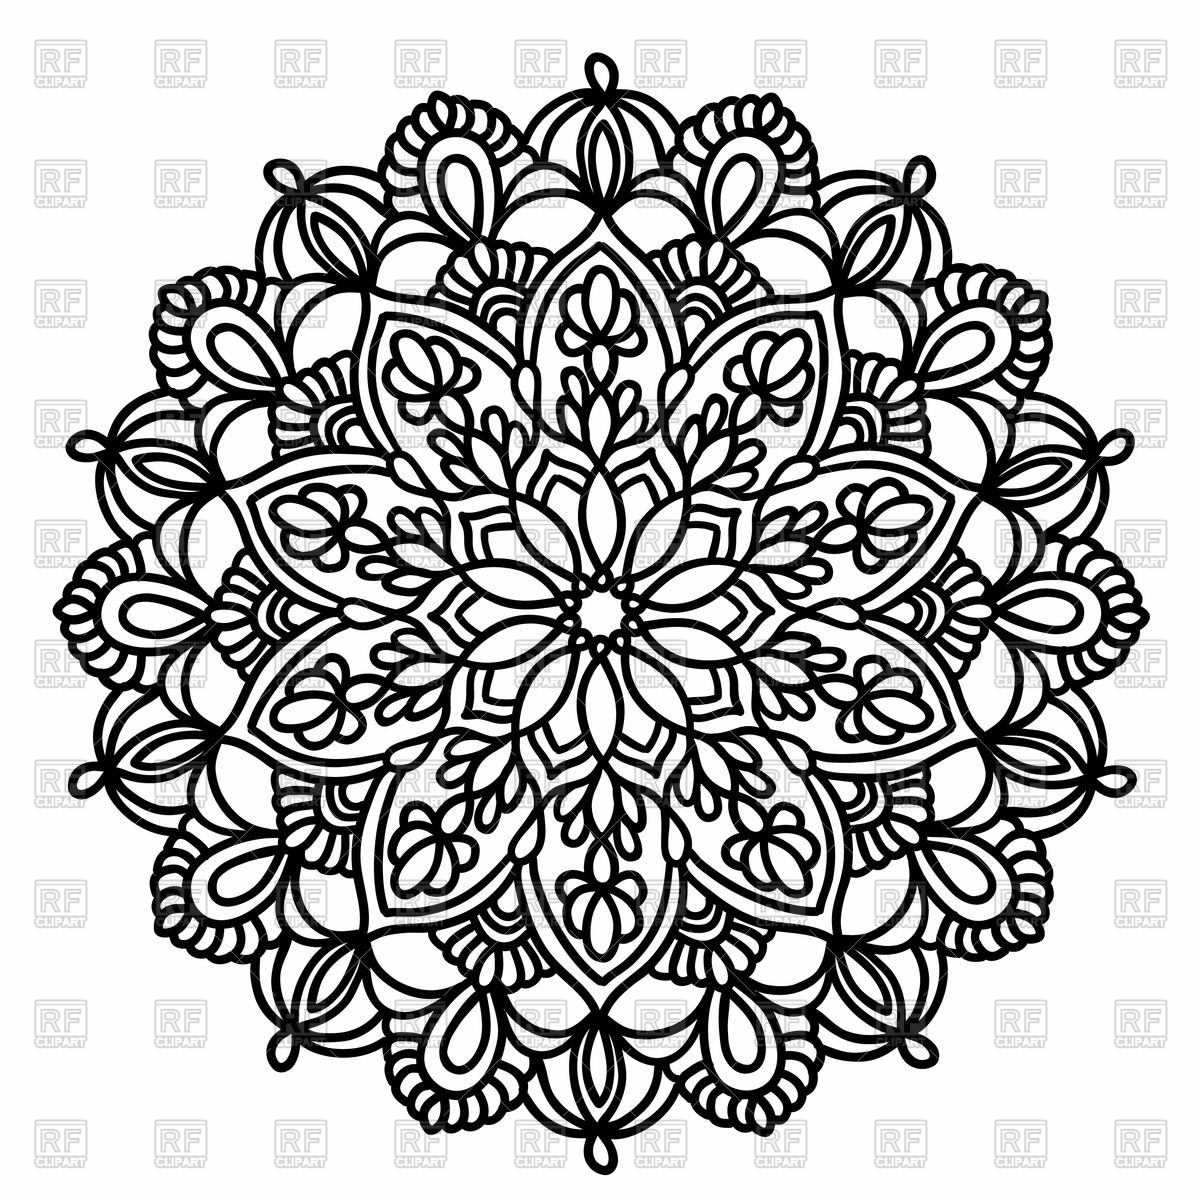 Ornamental round pattern with floral elements.